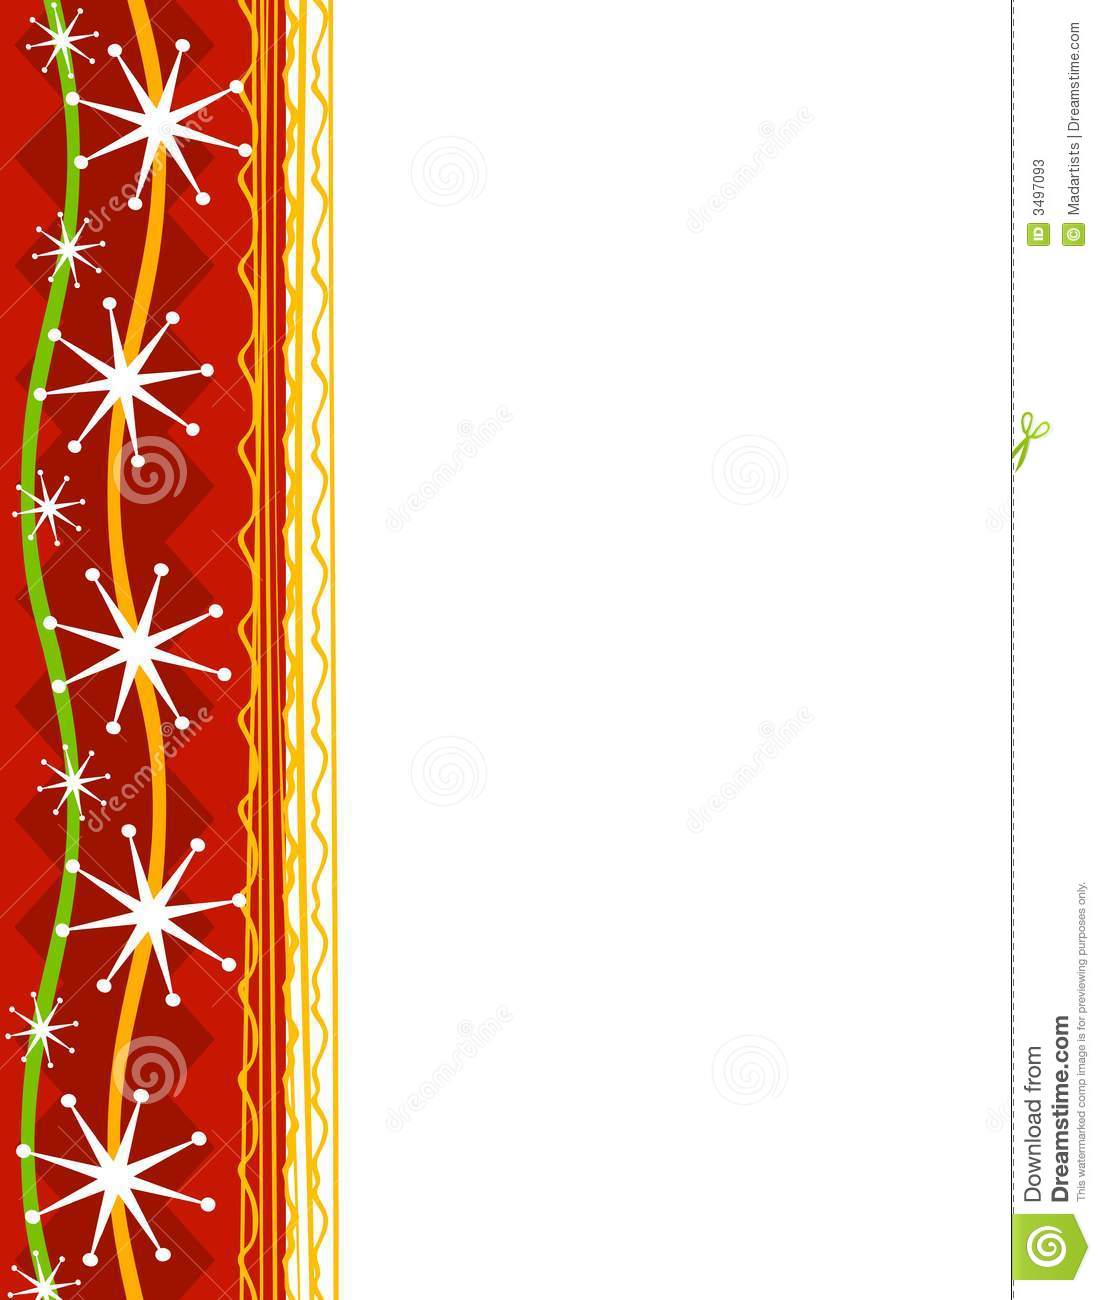 Christmas Clipart Borders Free For Mac   Clipart Panda   Free Clipart